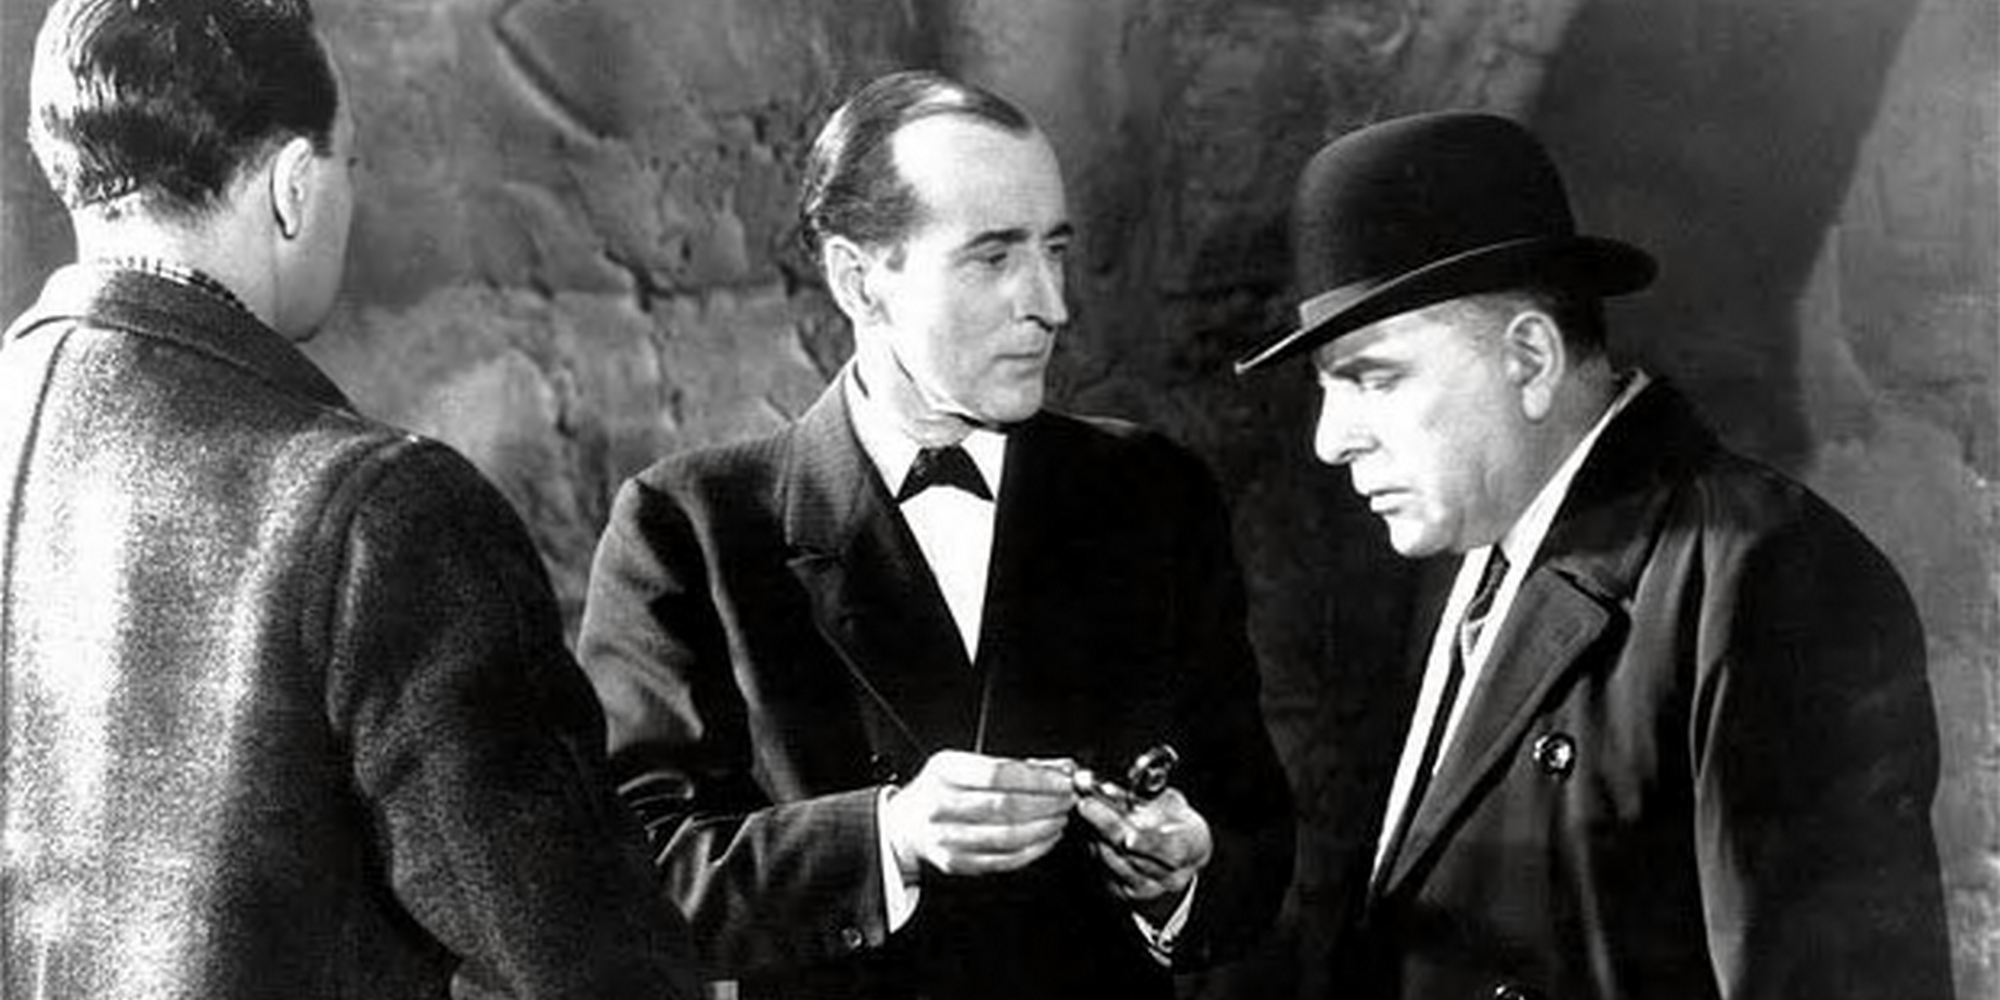 Still from old black and white Sherlock Holmes film